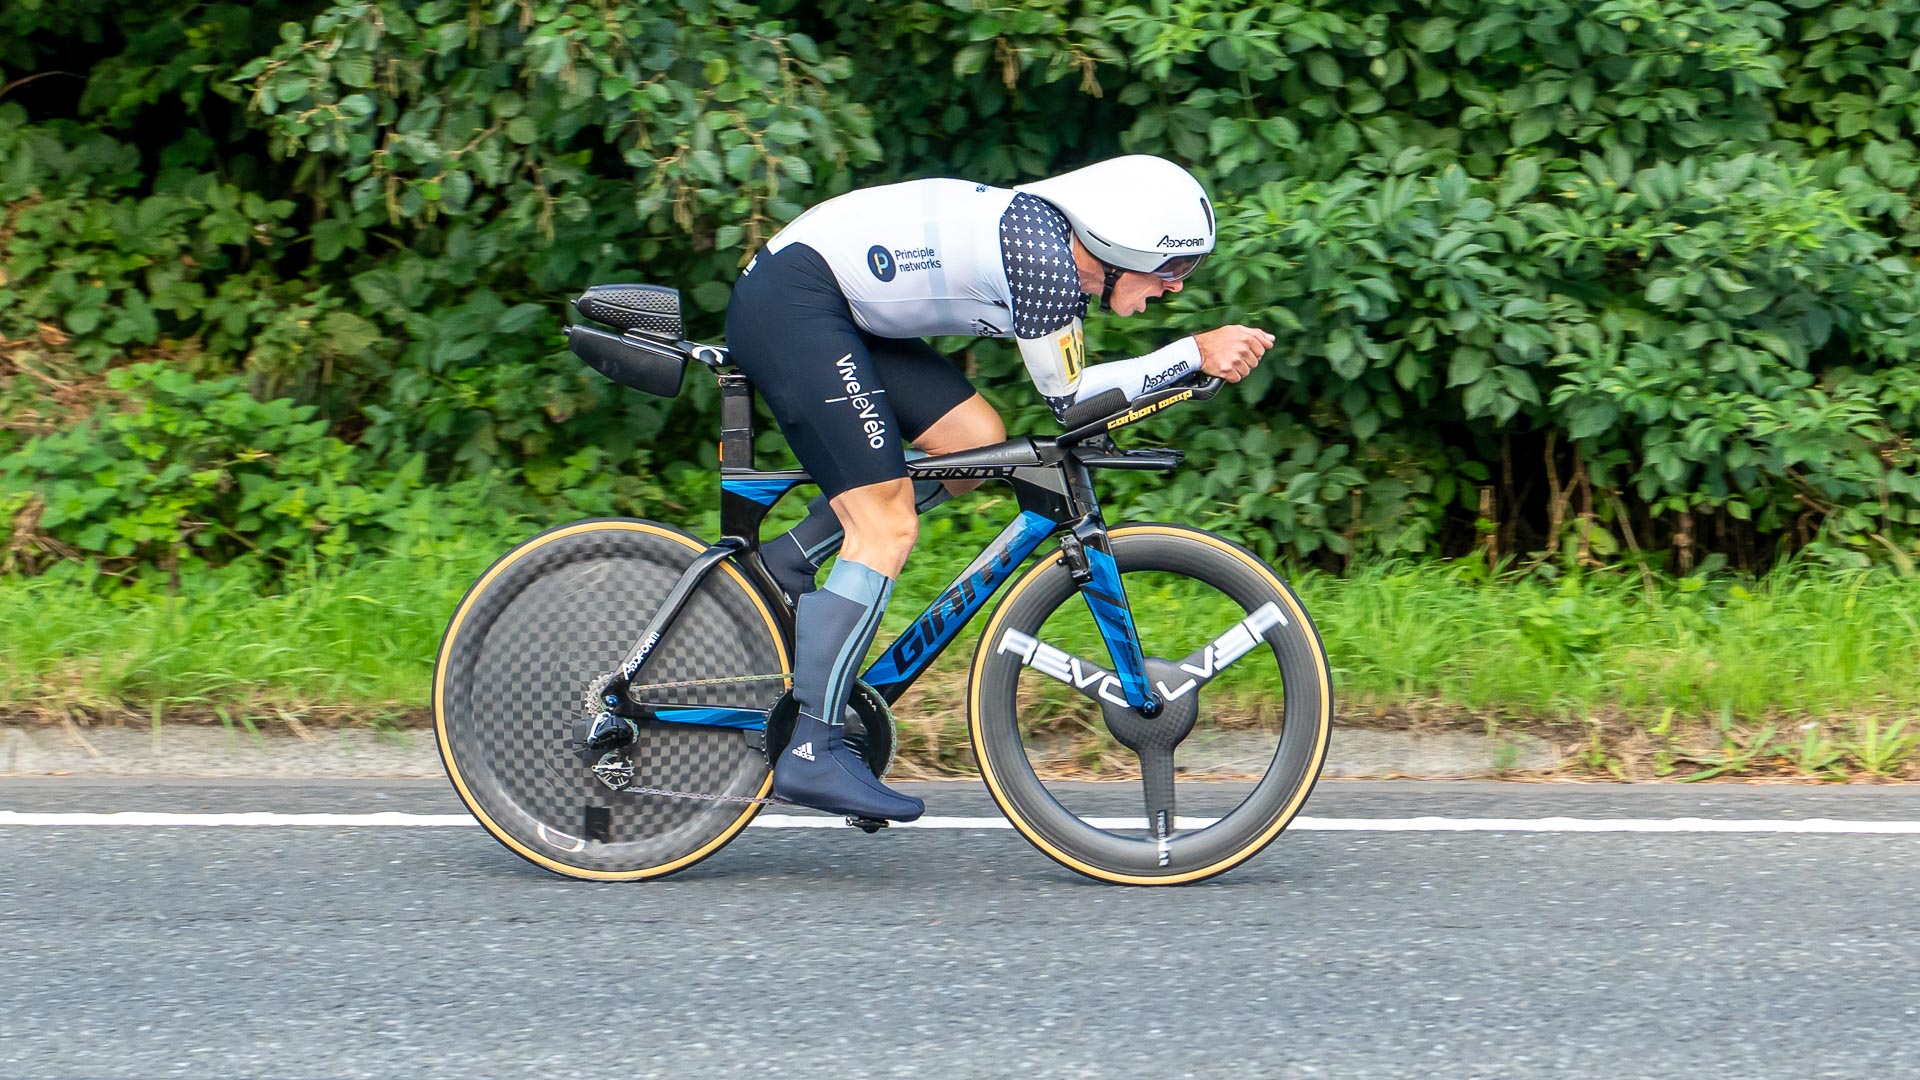 The photo shows Adam Duggleby racing the UK National Ten mile time trial with calf fairings under his overshoes and two aer bottles at the rear of his saddle.